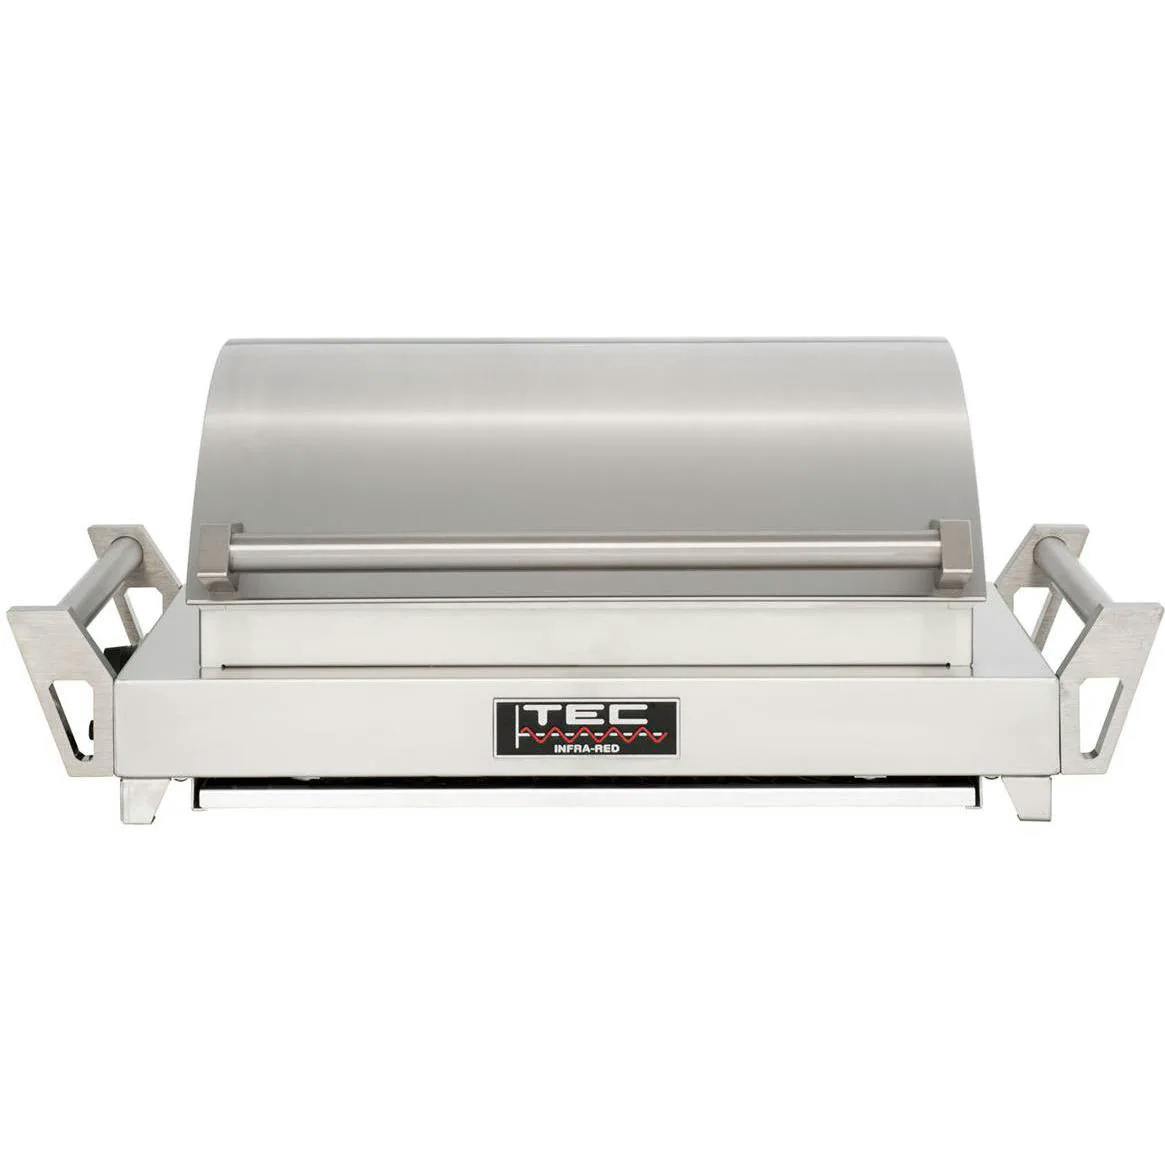 TEC G-Sport FR Portable Infrared Grill · 30 in. · Natural Gas